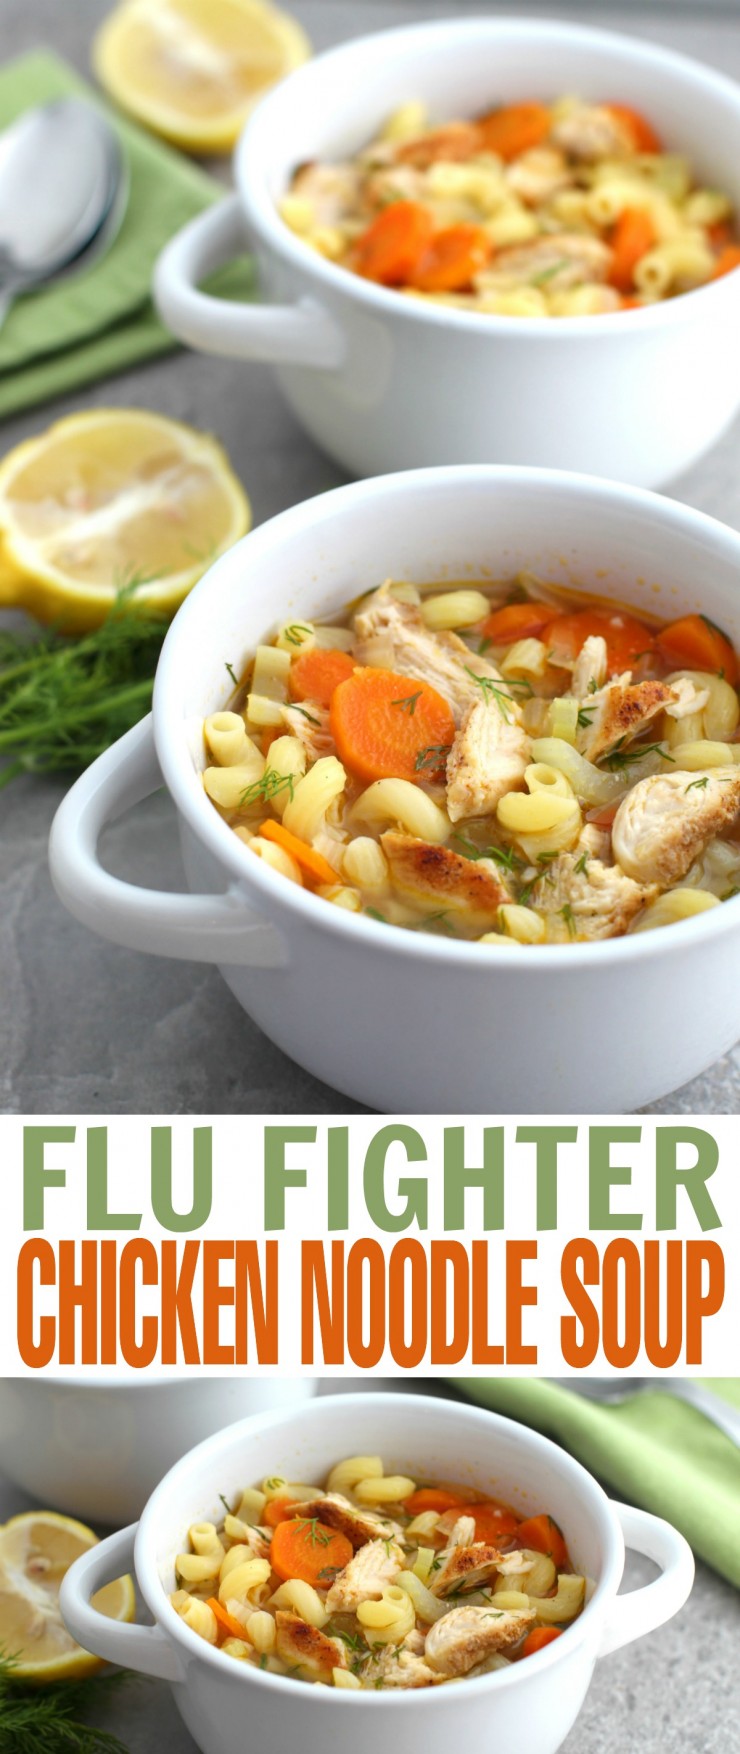 When you are recovering from the flu there is nothing more comforting than a hot bowl of soup. This Flu Fighter Chicken Noodle Soup Recipe offers a mix of spices that may help boost your immune system.